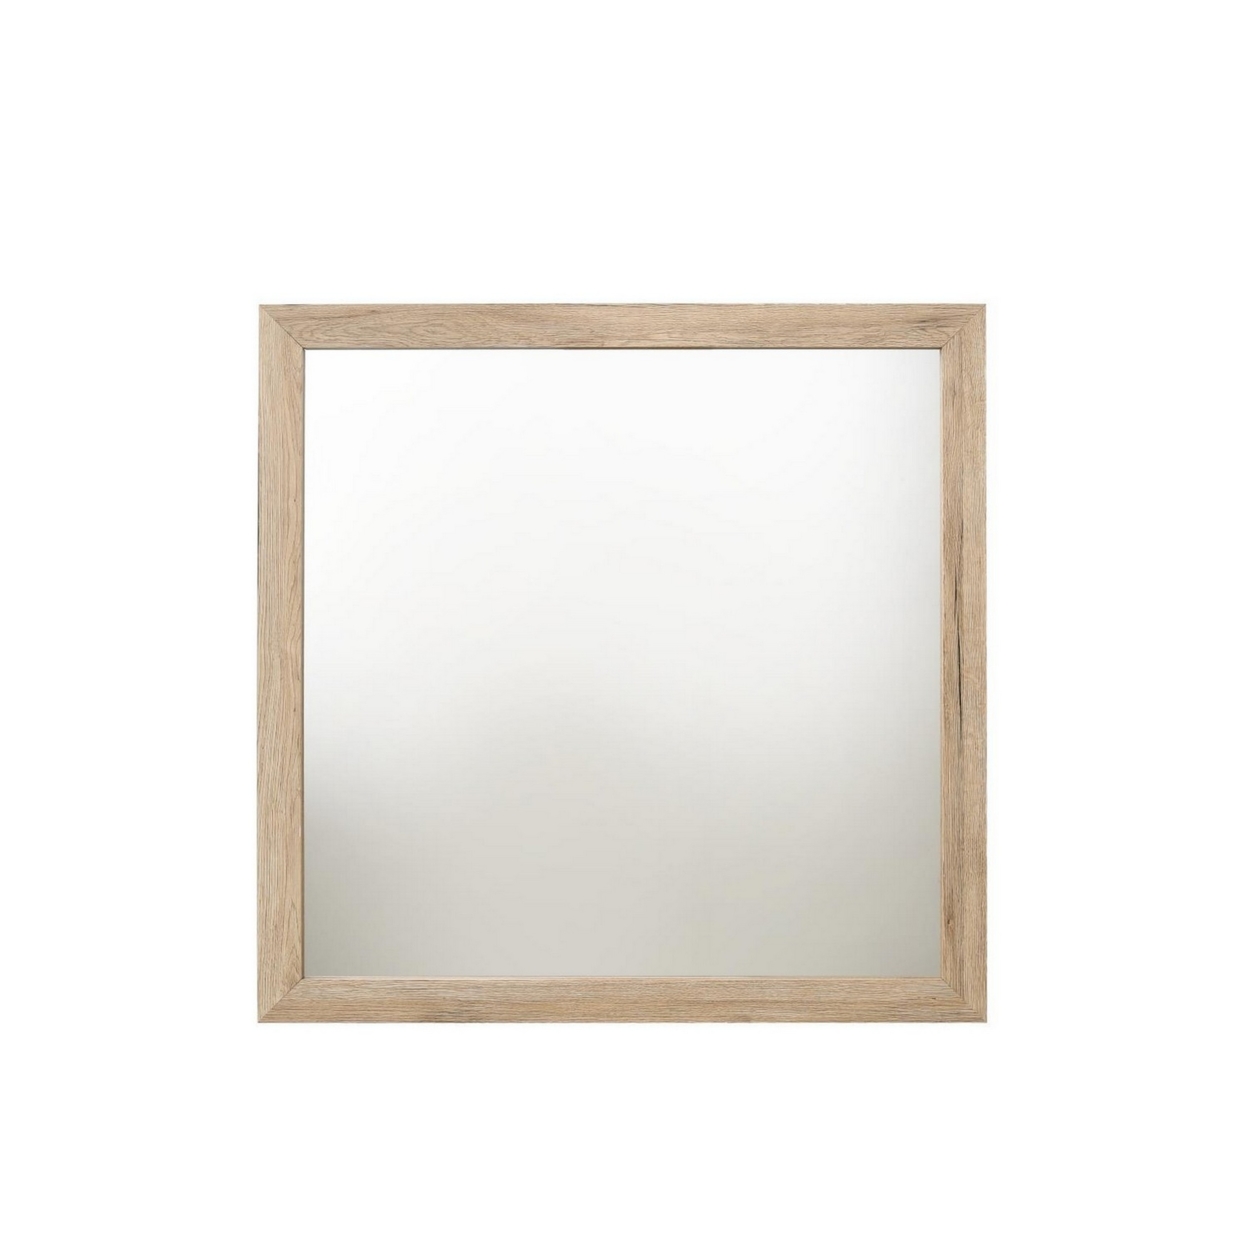 Square Shaped Wooden Mirror With Rough Hewn Texture, Brown- Saltoro Sherpi